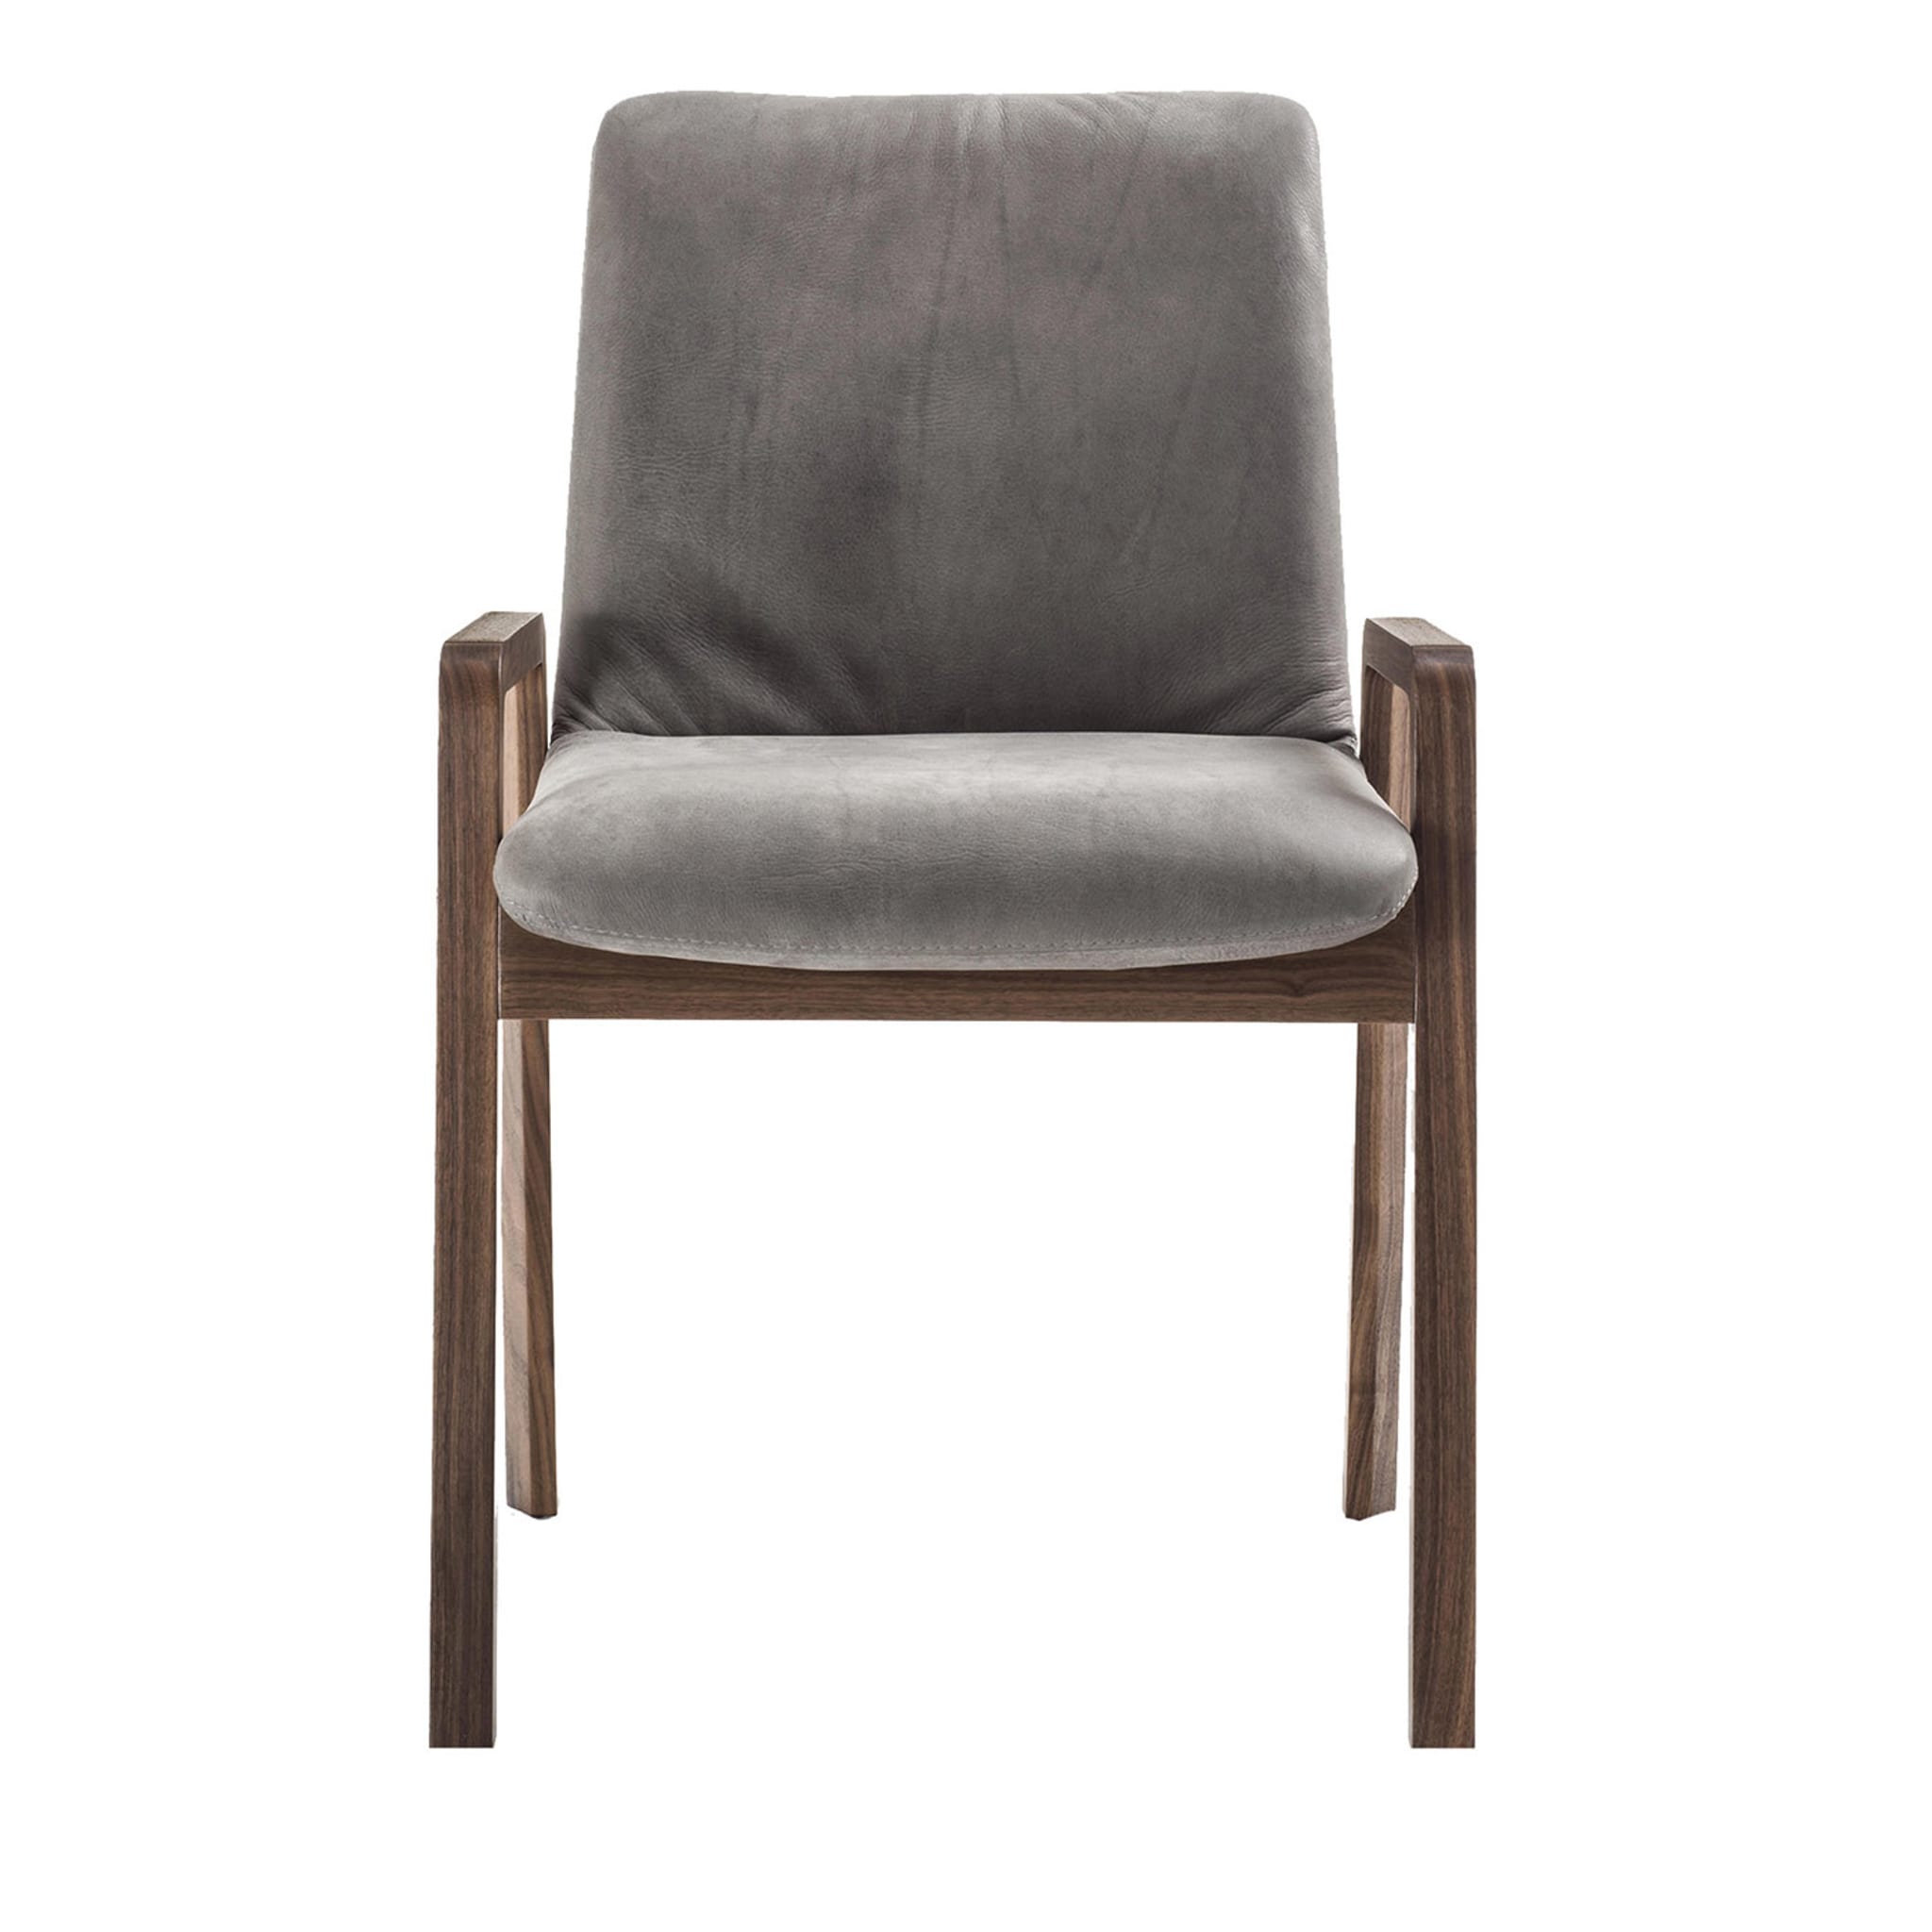 Noblé Gray Chair With Arms by Giuliano & Gabriele Cappelletti - Main view